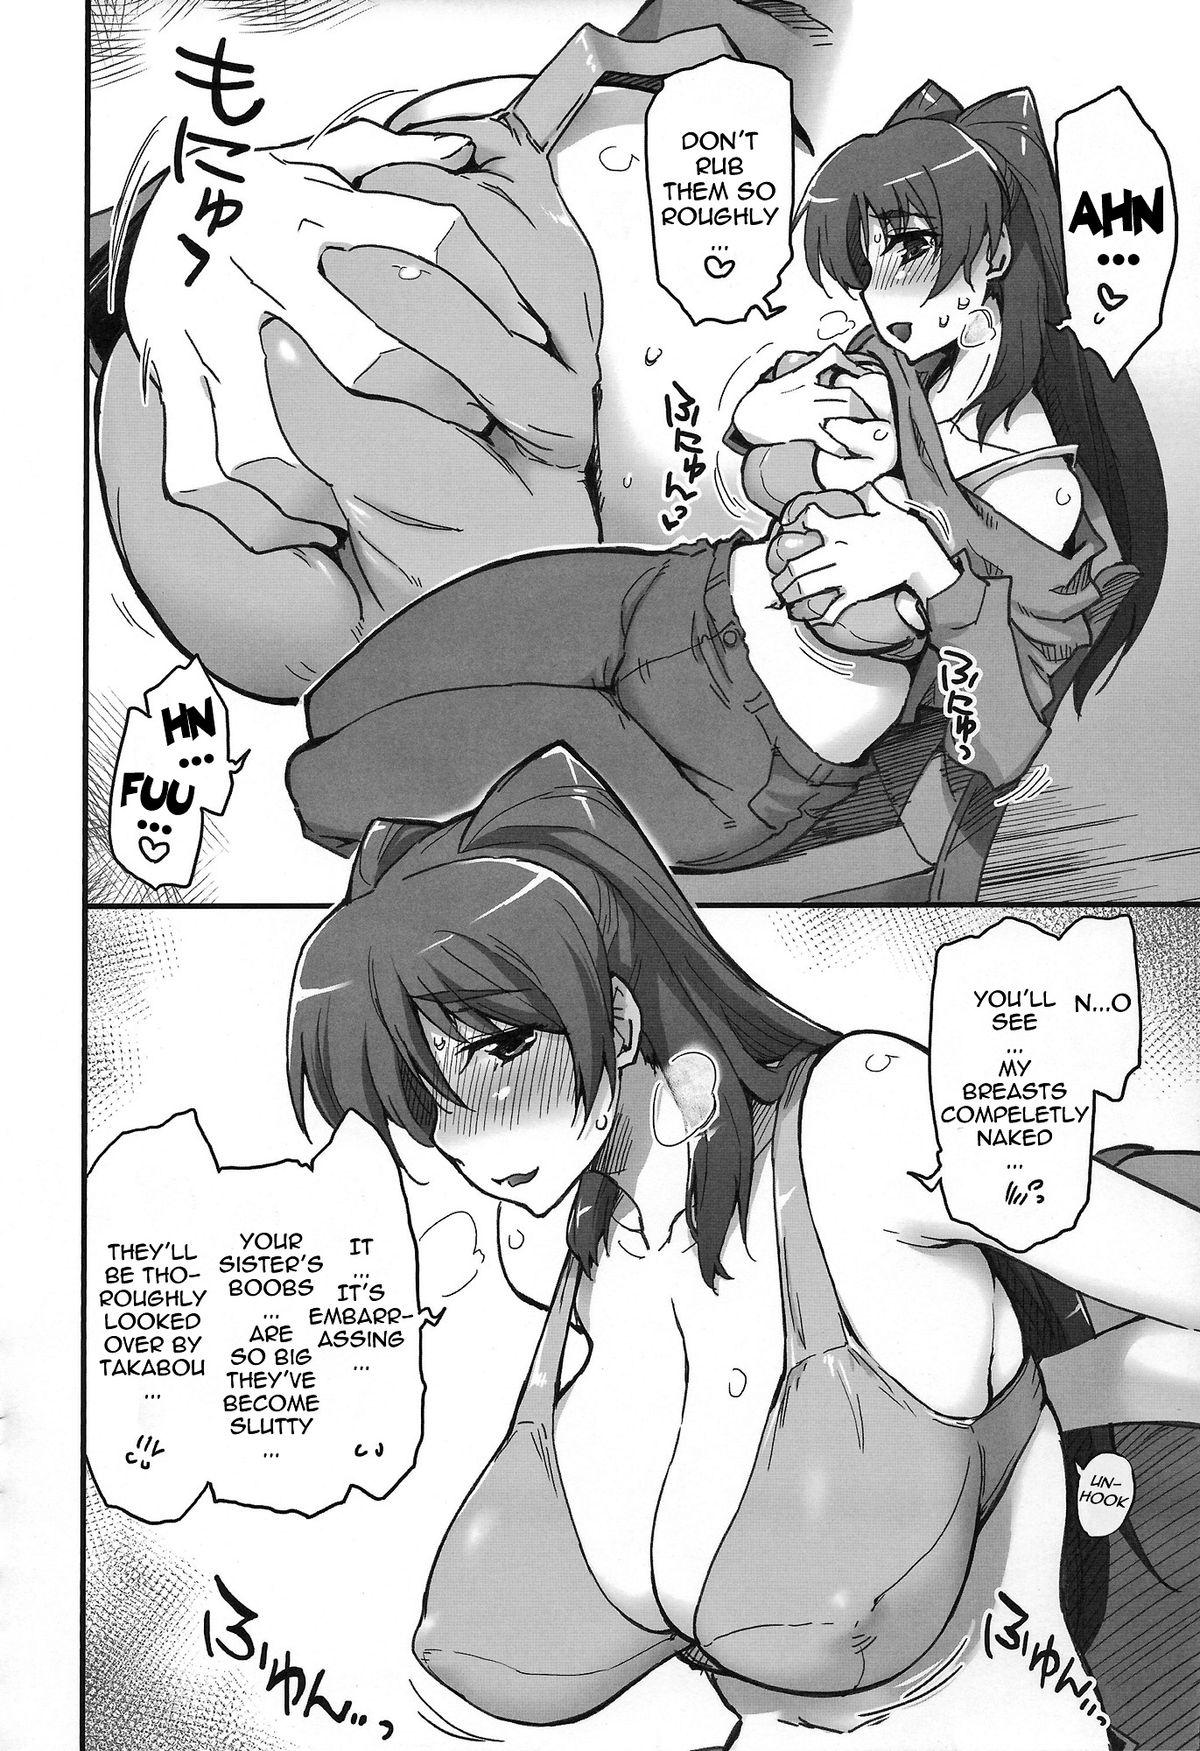 Hot Naked Girl Complex-5. E.N.Complex! - The idolmaster Toheart2 Amateur Sex - Page 11